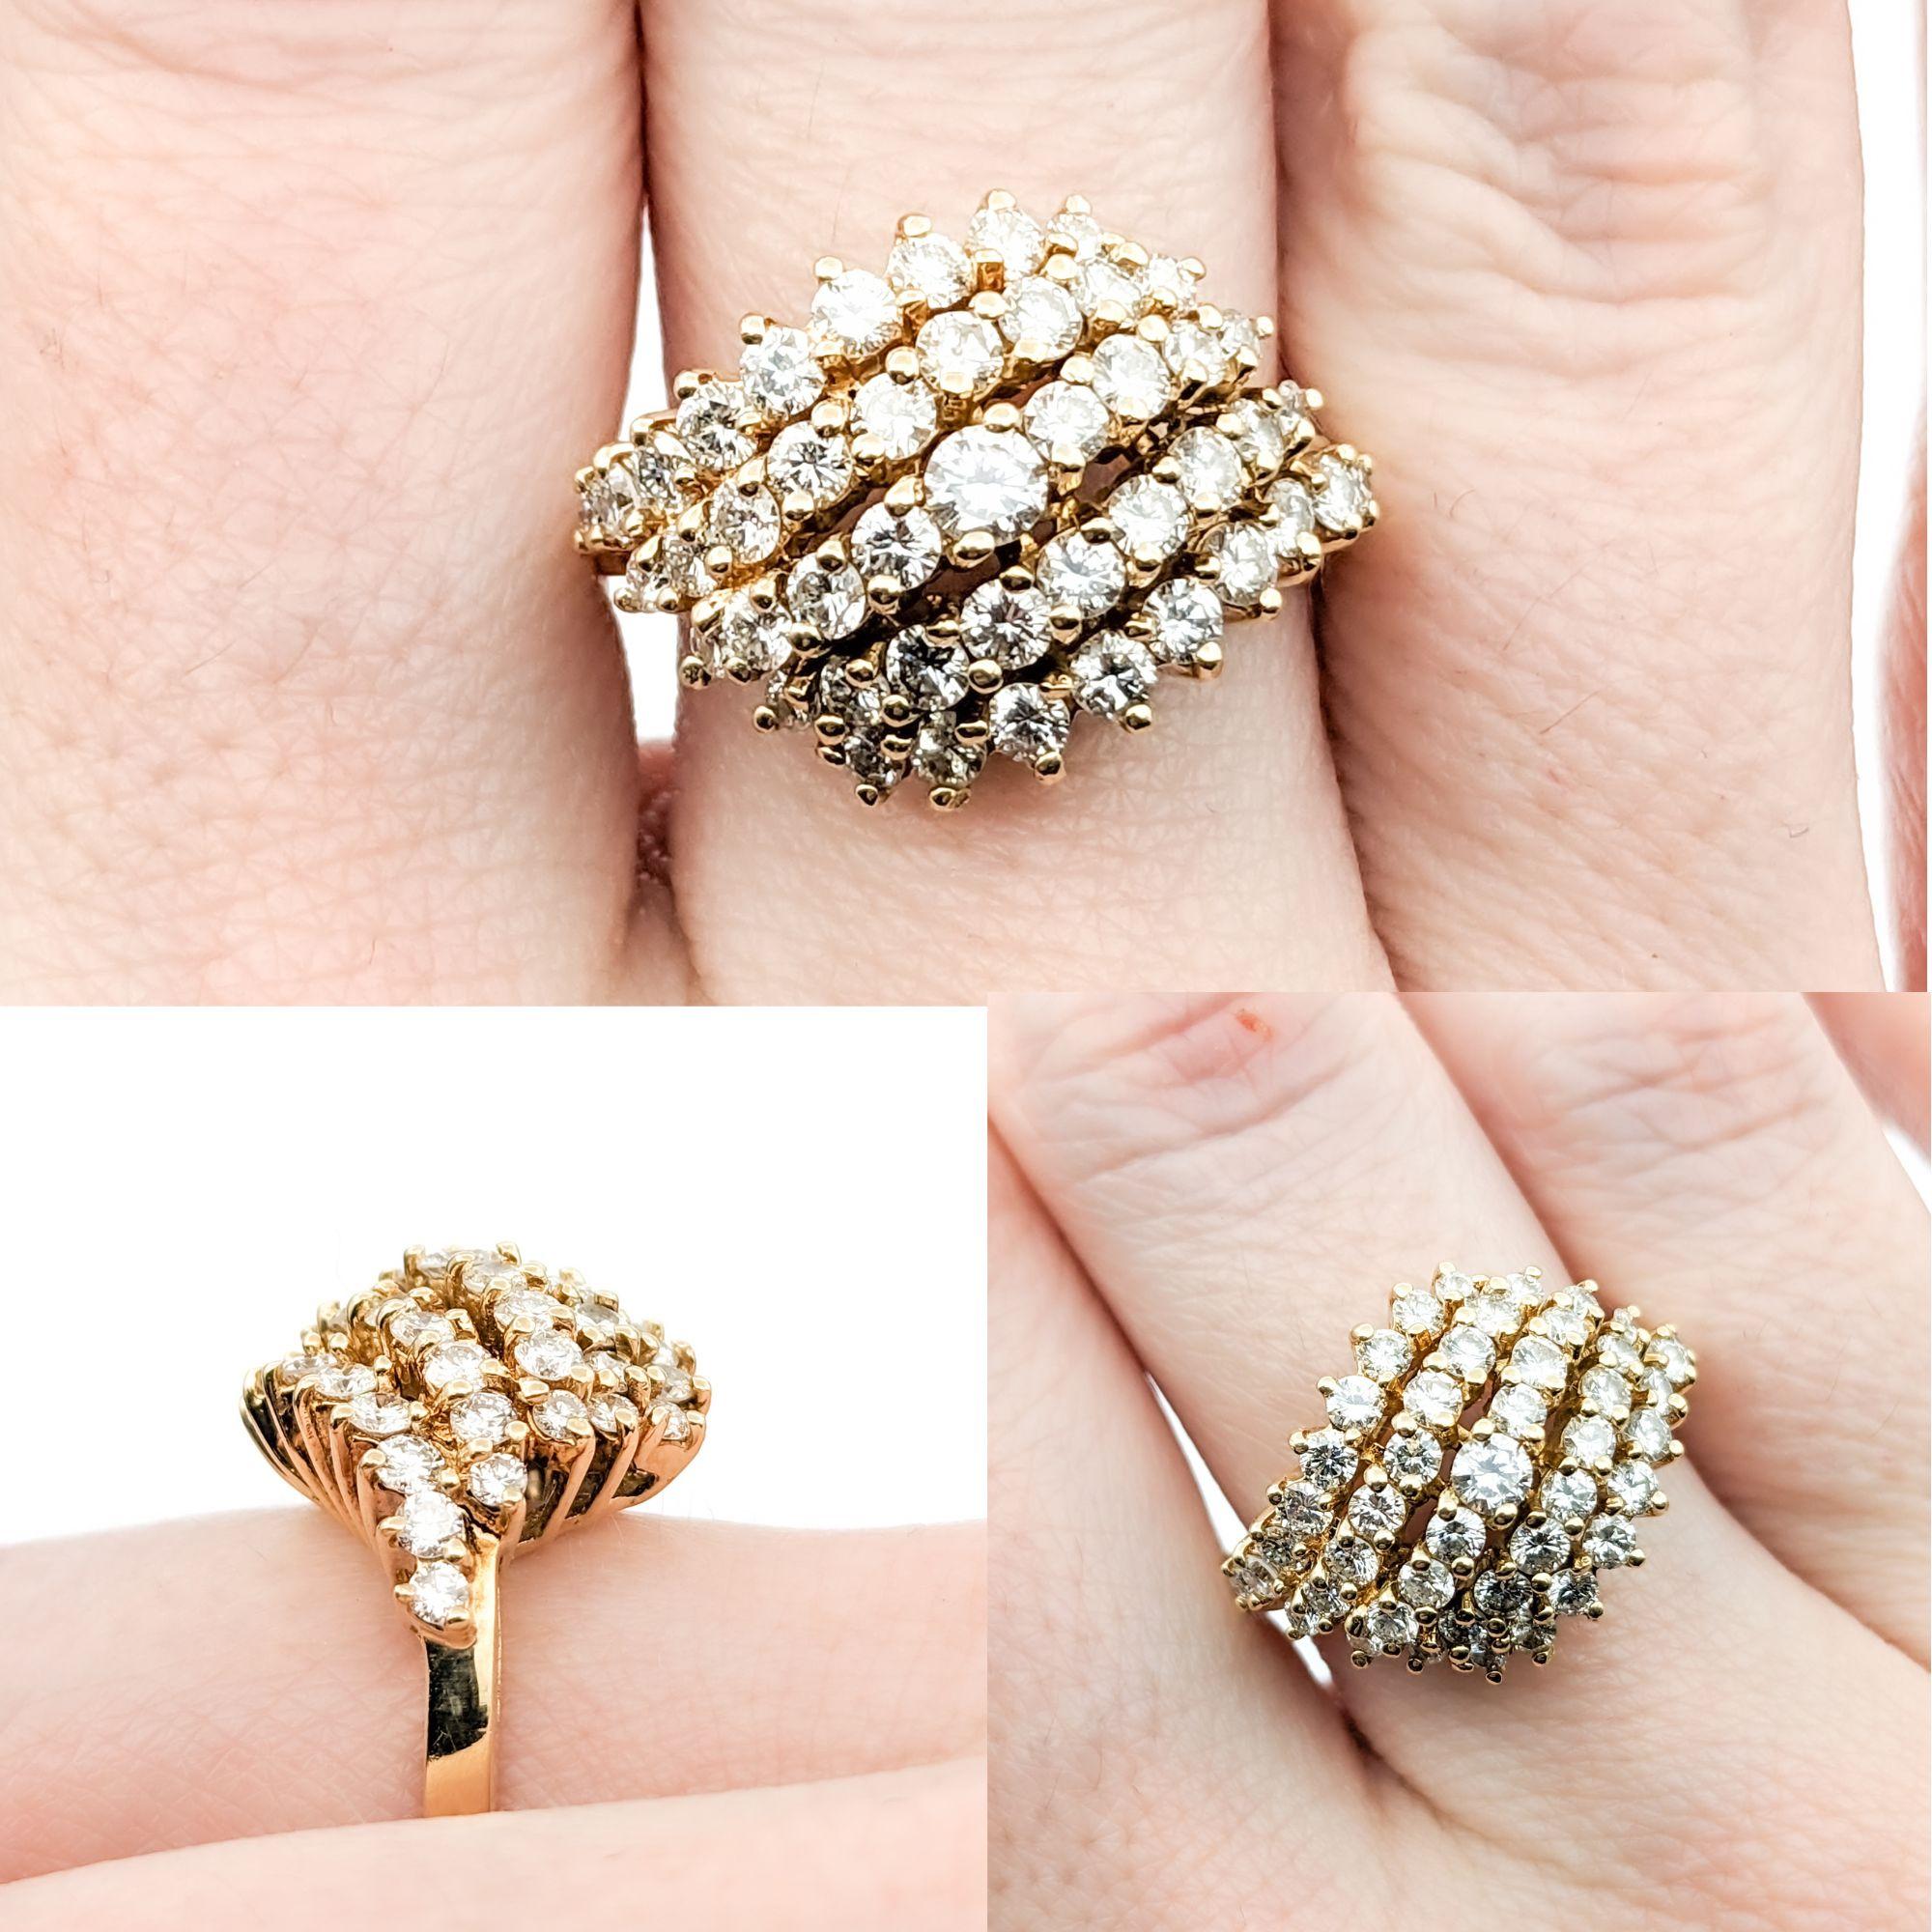 1.50ctw Diamond Waterfall Cluster Ring In Yelllow Gold

This magnificent ring, elegantly crafted in 14kt yellow gold, dazzles with an impressive array of diamonds totaling 1.50 carats, arranged in a breathtaking waterfall cluster that cascades